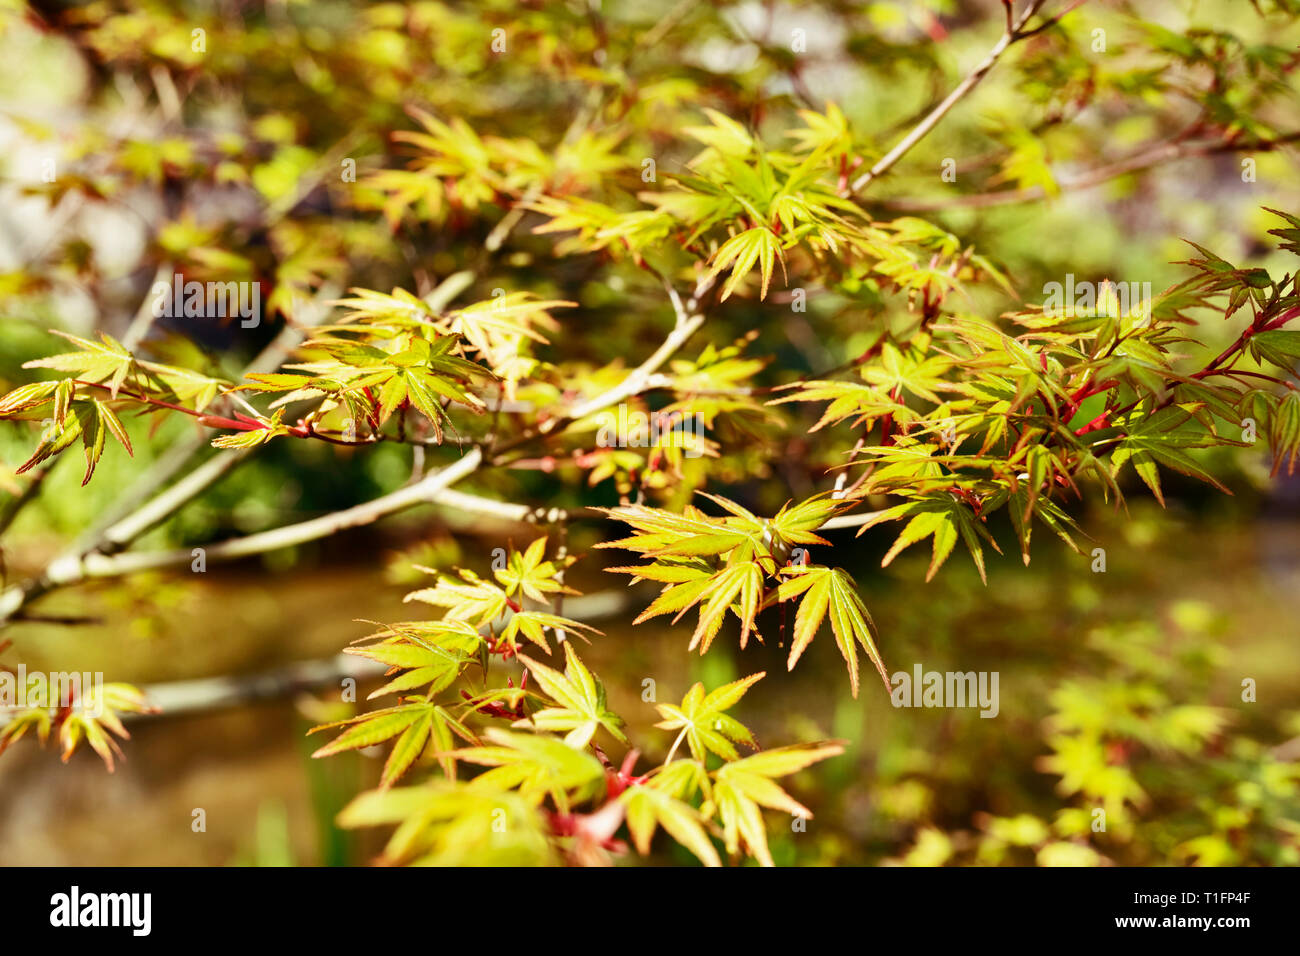 Japanese  maple -acer palmatum - tree  , beautiful green leaves with red edges  ,leaves with seven lobes and  pointed lobes Stock Photo